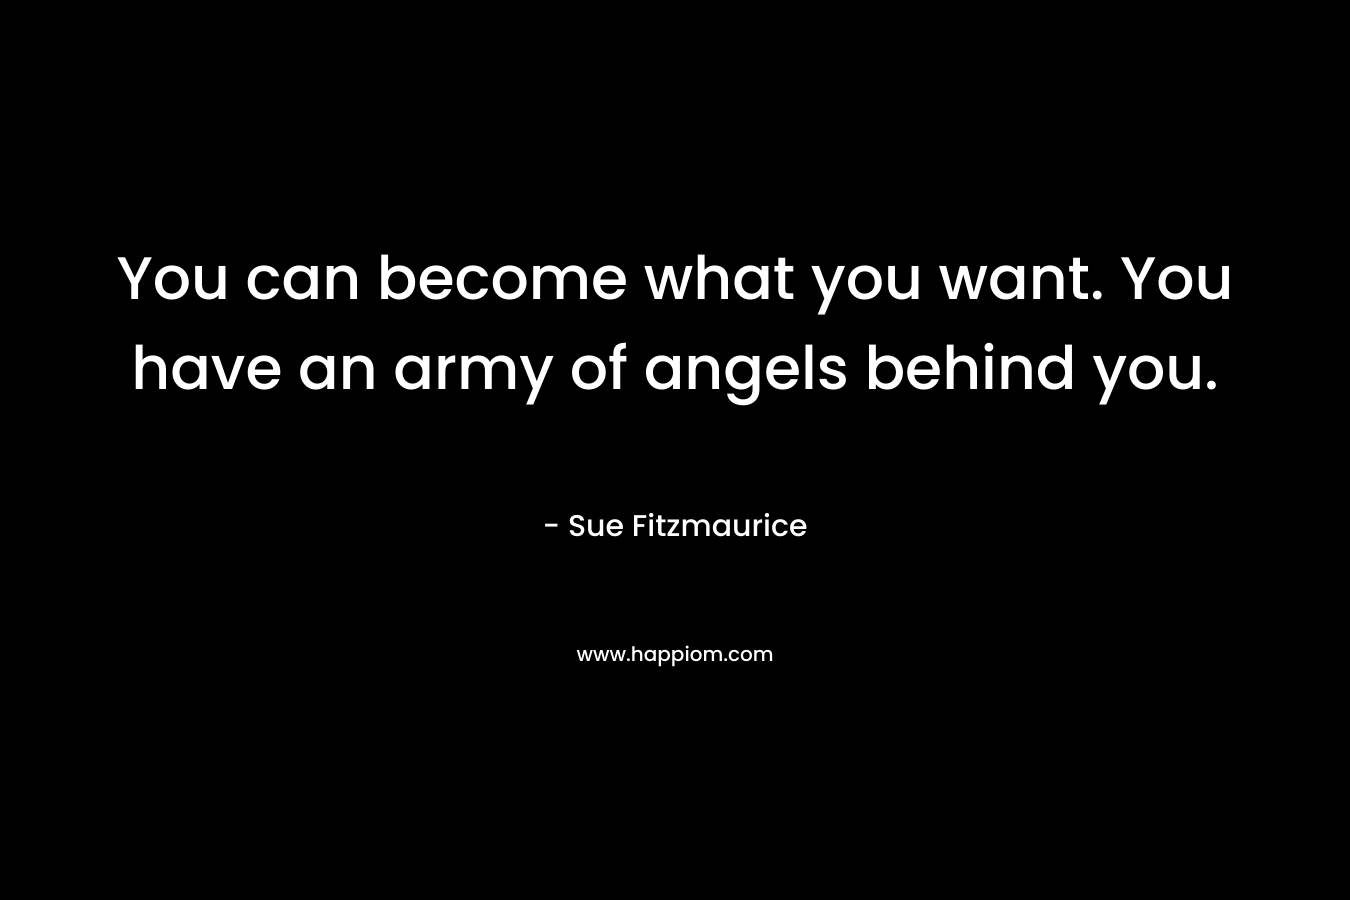 You can become what you want. You have an army of angels behind you.